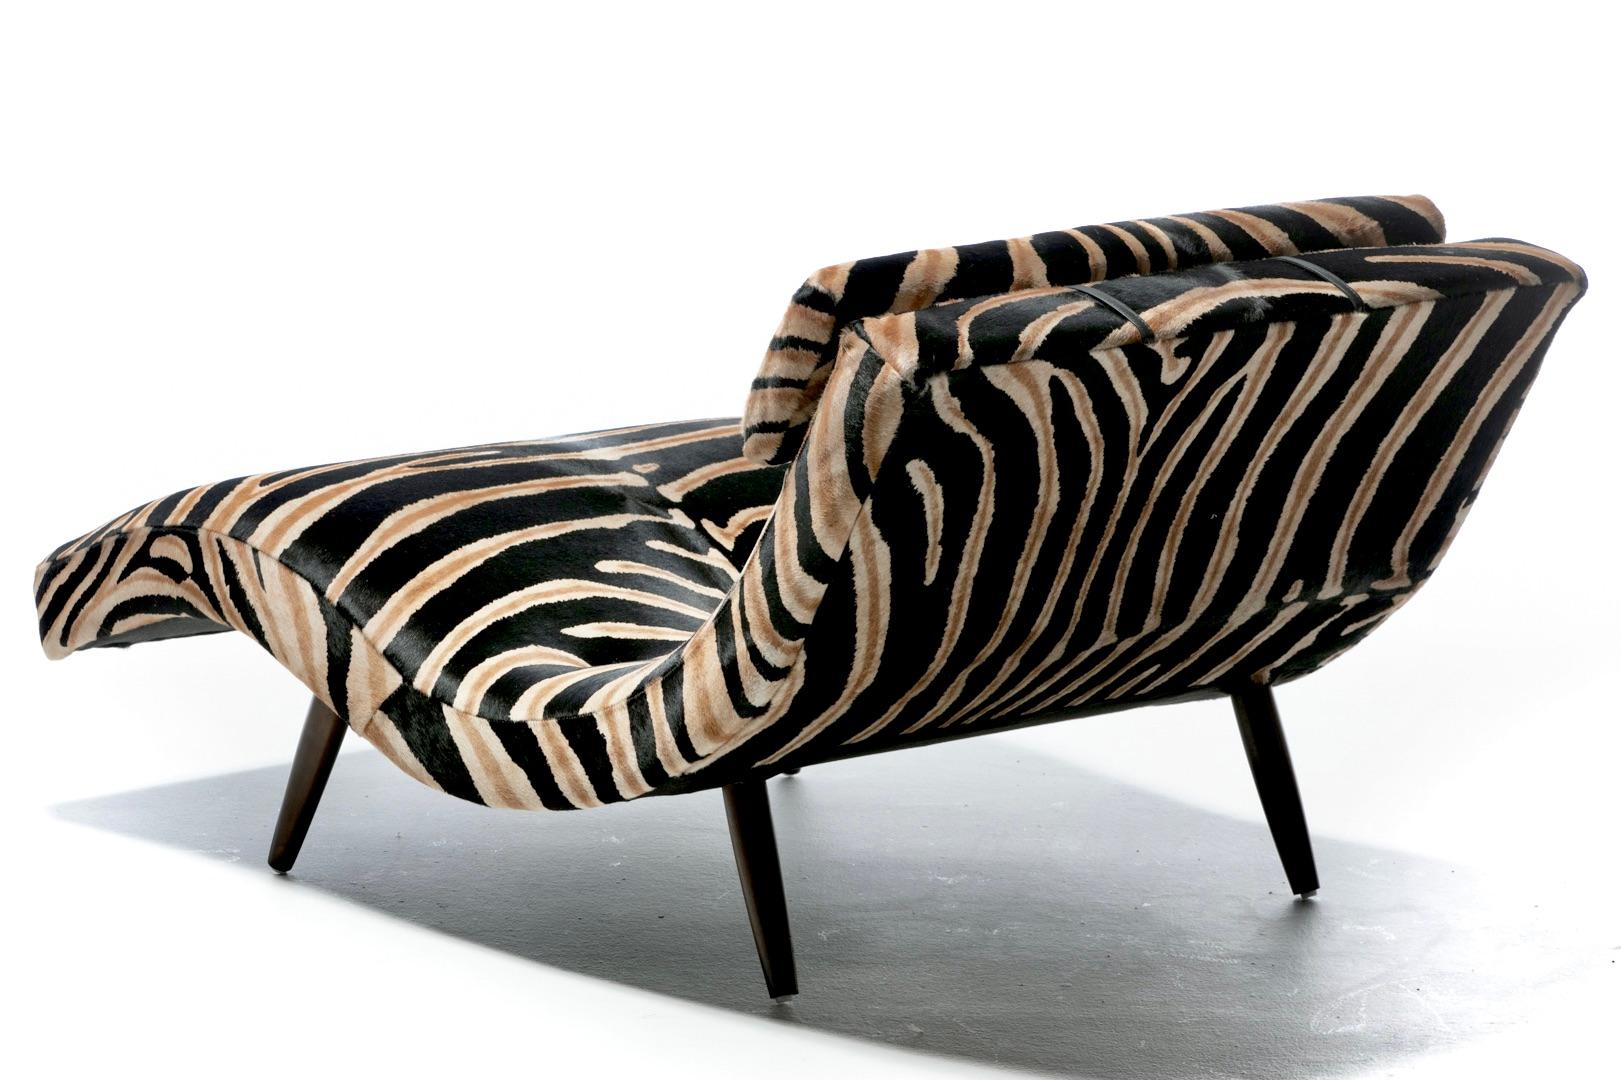 Mid-20th Century Adrian Pearsall Wave Chaise in Zebra Print Cowhide Upholstery For Sale